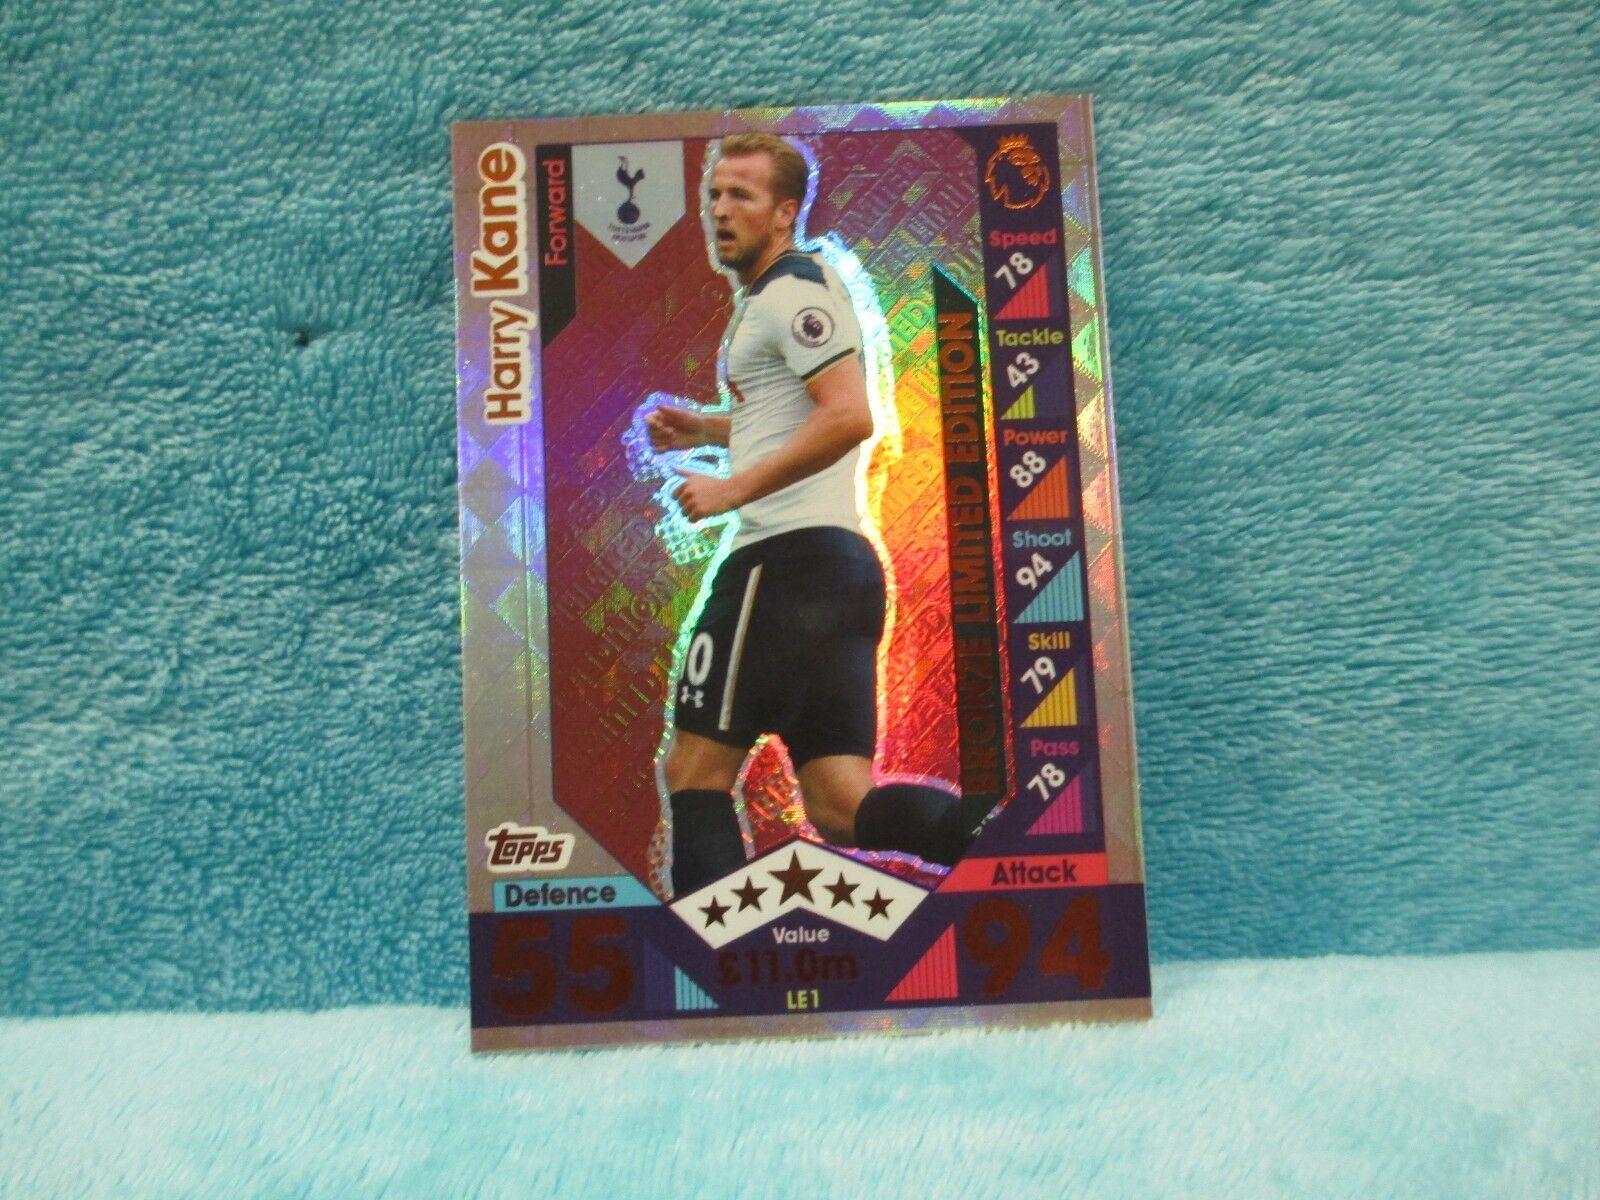 Match Attax Attack 16 17 2016 17 LE1 Harry Kane BRONZE Limited Edition MINT